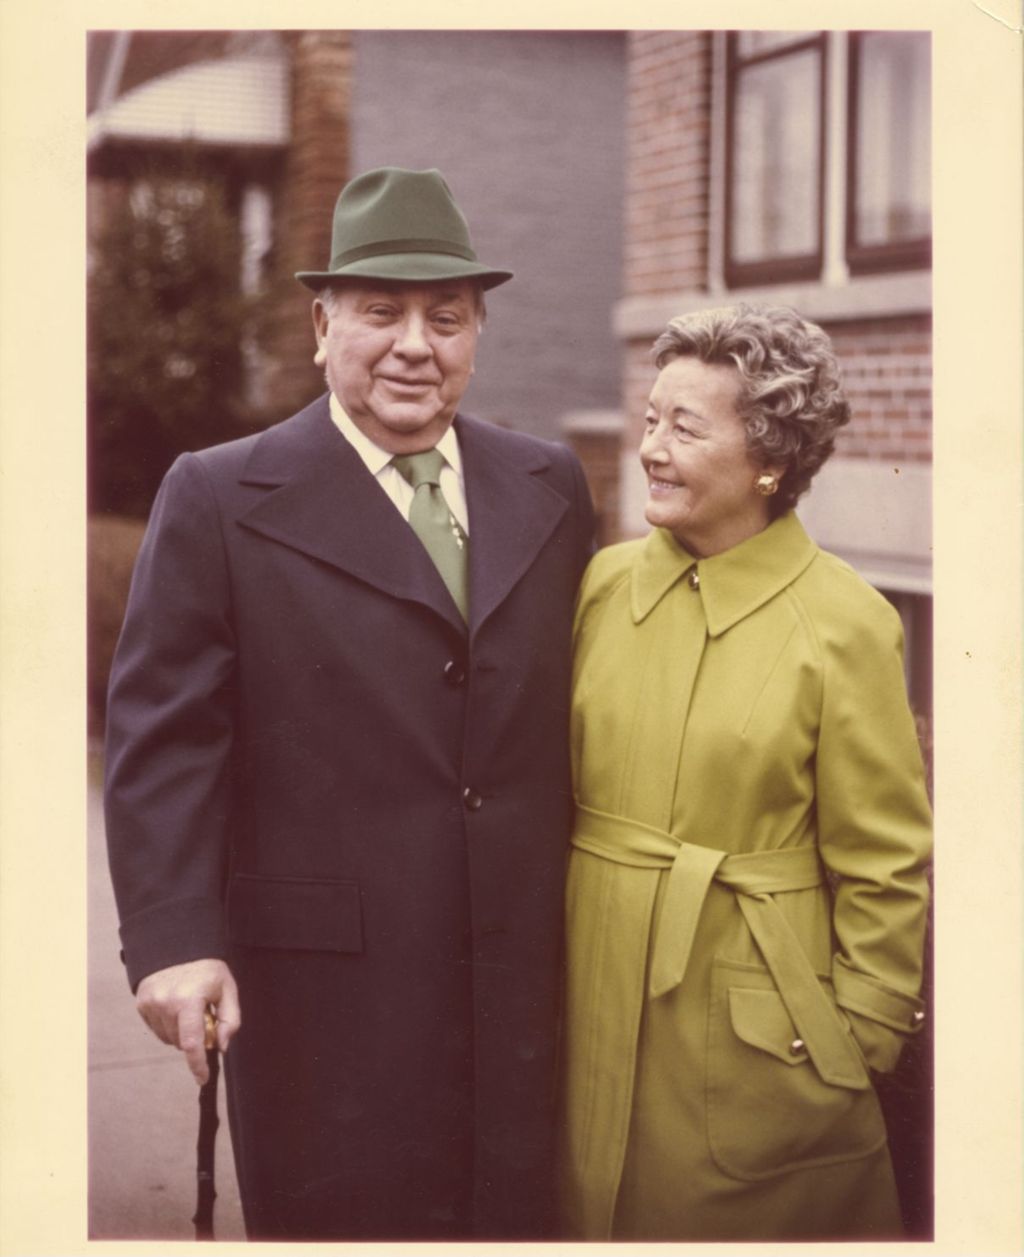 St. Patrick's Day, Eleanor and Richard J. Daley